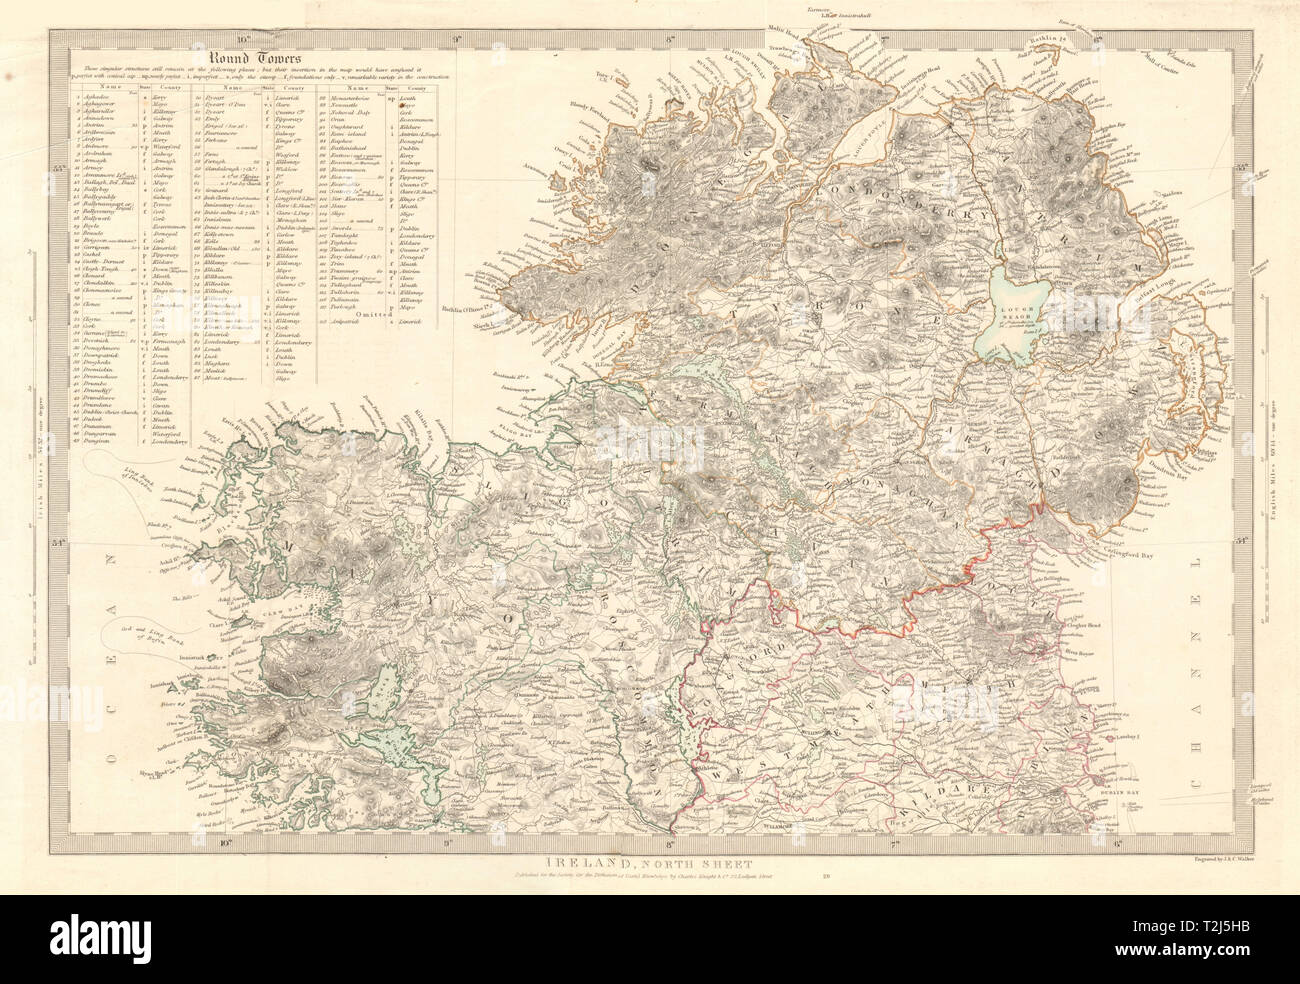 IRELAND North Sheet. List of round towers Cloigtheach Cloigthithe. SDUK 1845 map Stock Photo